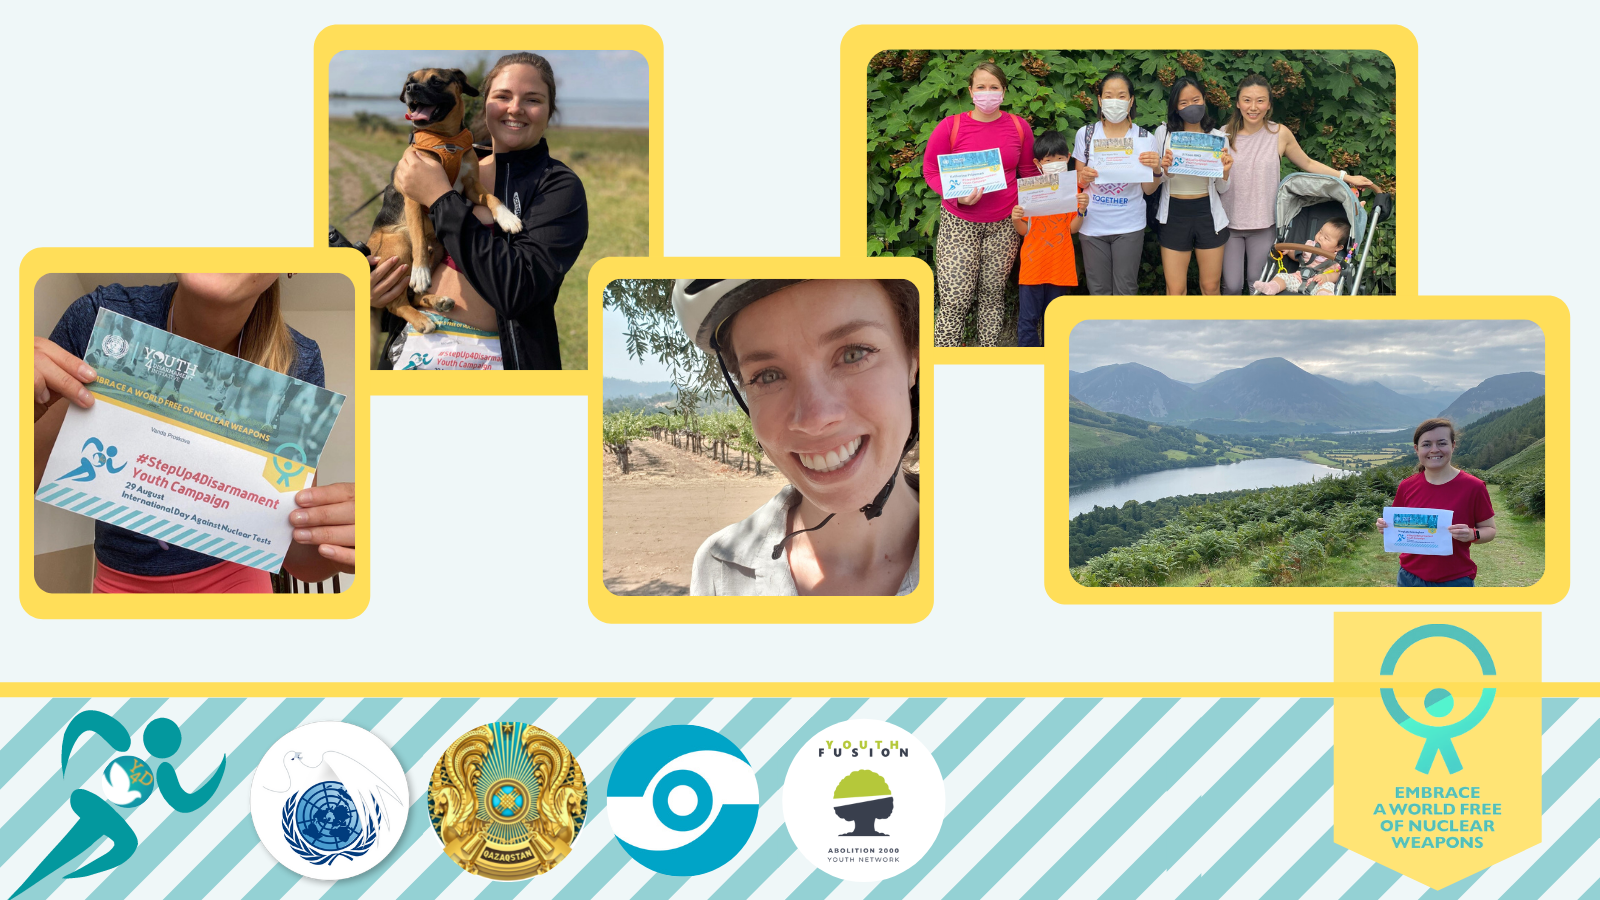 The #Youth4Disarmament Team, joined by UNODA staff and Youth Fusion’s co-convenors, completed the #StepUp4Disarmament Youth Campaign on 29 August 2021 to commemorate the International Day against Nuclear Tests and 30th anniversary of the closure of the Semipalatinsk nuclear test site.